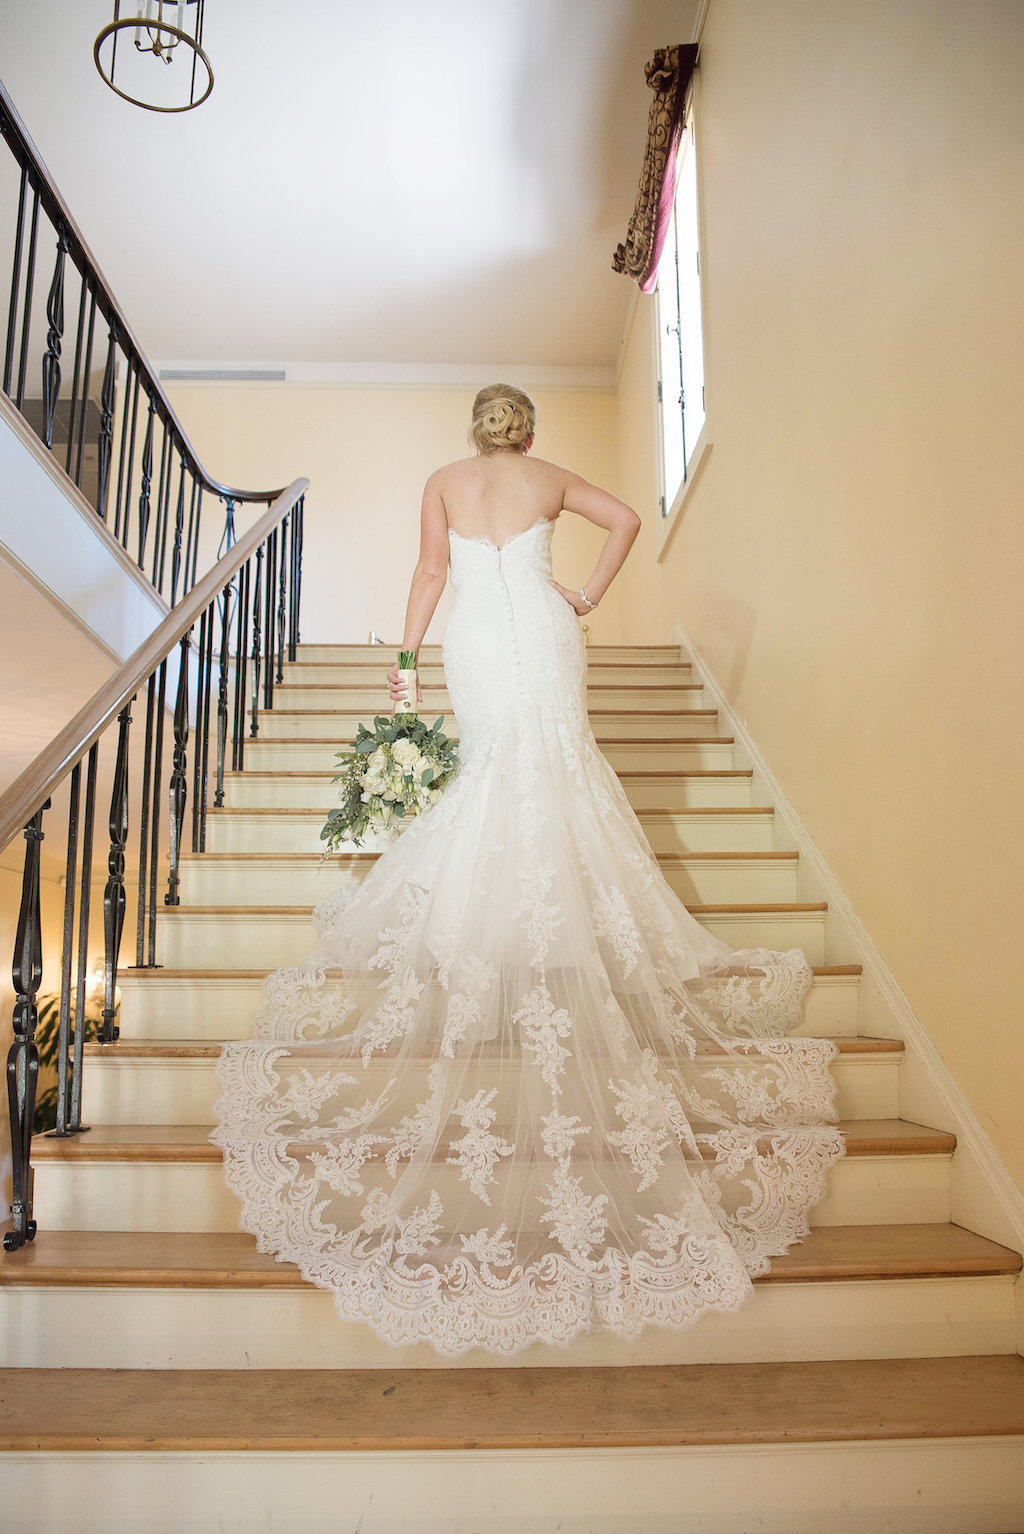 Bride on Staircase wedding Portrait with White and Greenery Bouquet wearing Strapless Lace Train Allure Bridals Wedding Dress | Sarasota Historic Wedding Venue The Edson Keith Mansion | Tampa Bay Wedding Photographer Kristen Marie Photography